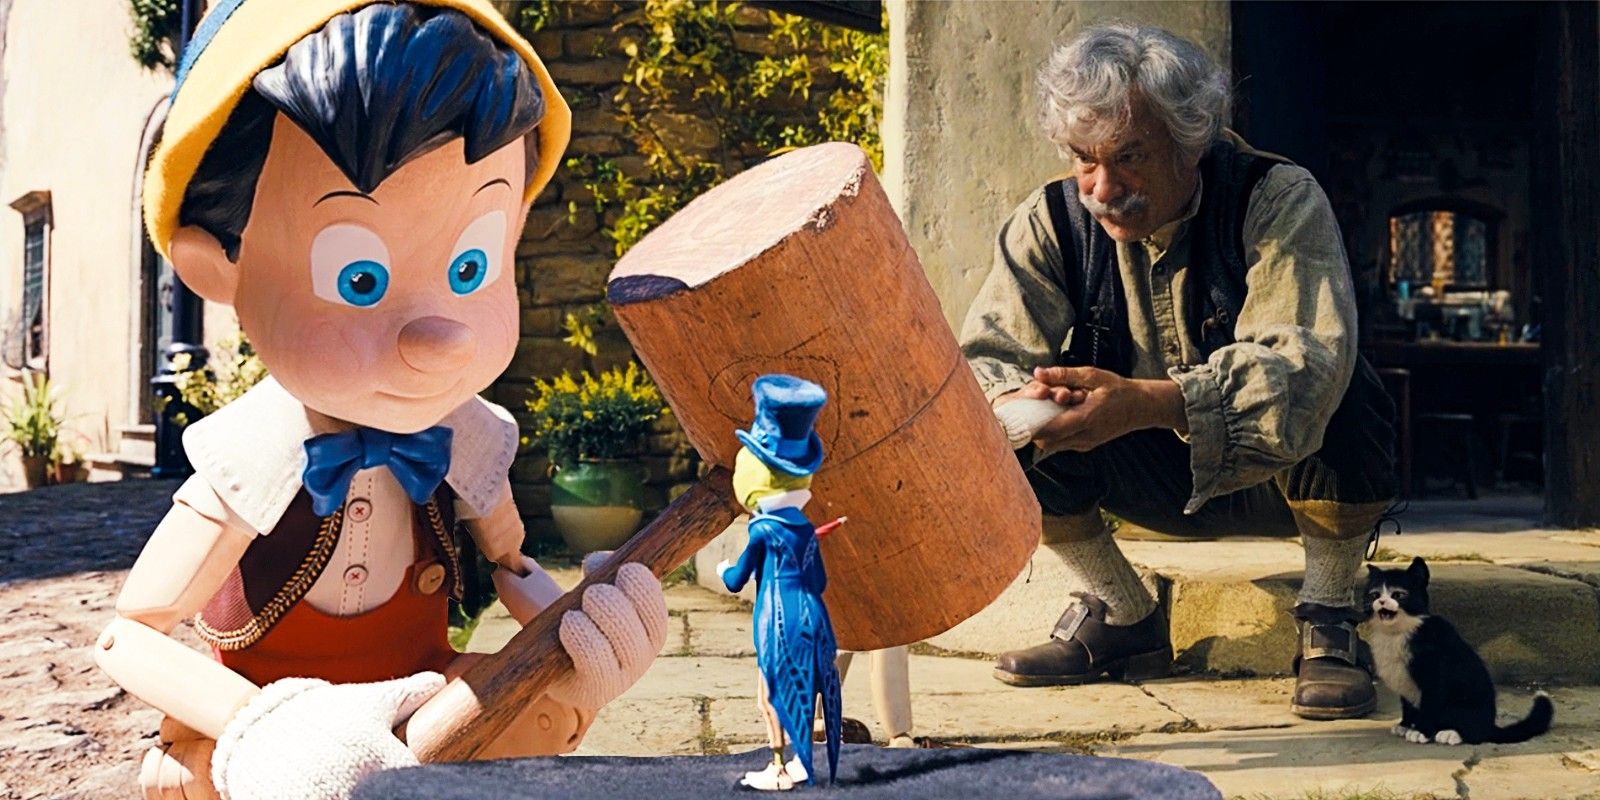 Benjamin Evan Ainsworth as Pinocchio and Tom Hanks as Geppetto in Pinocchio